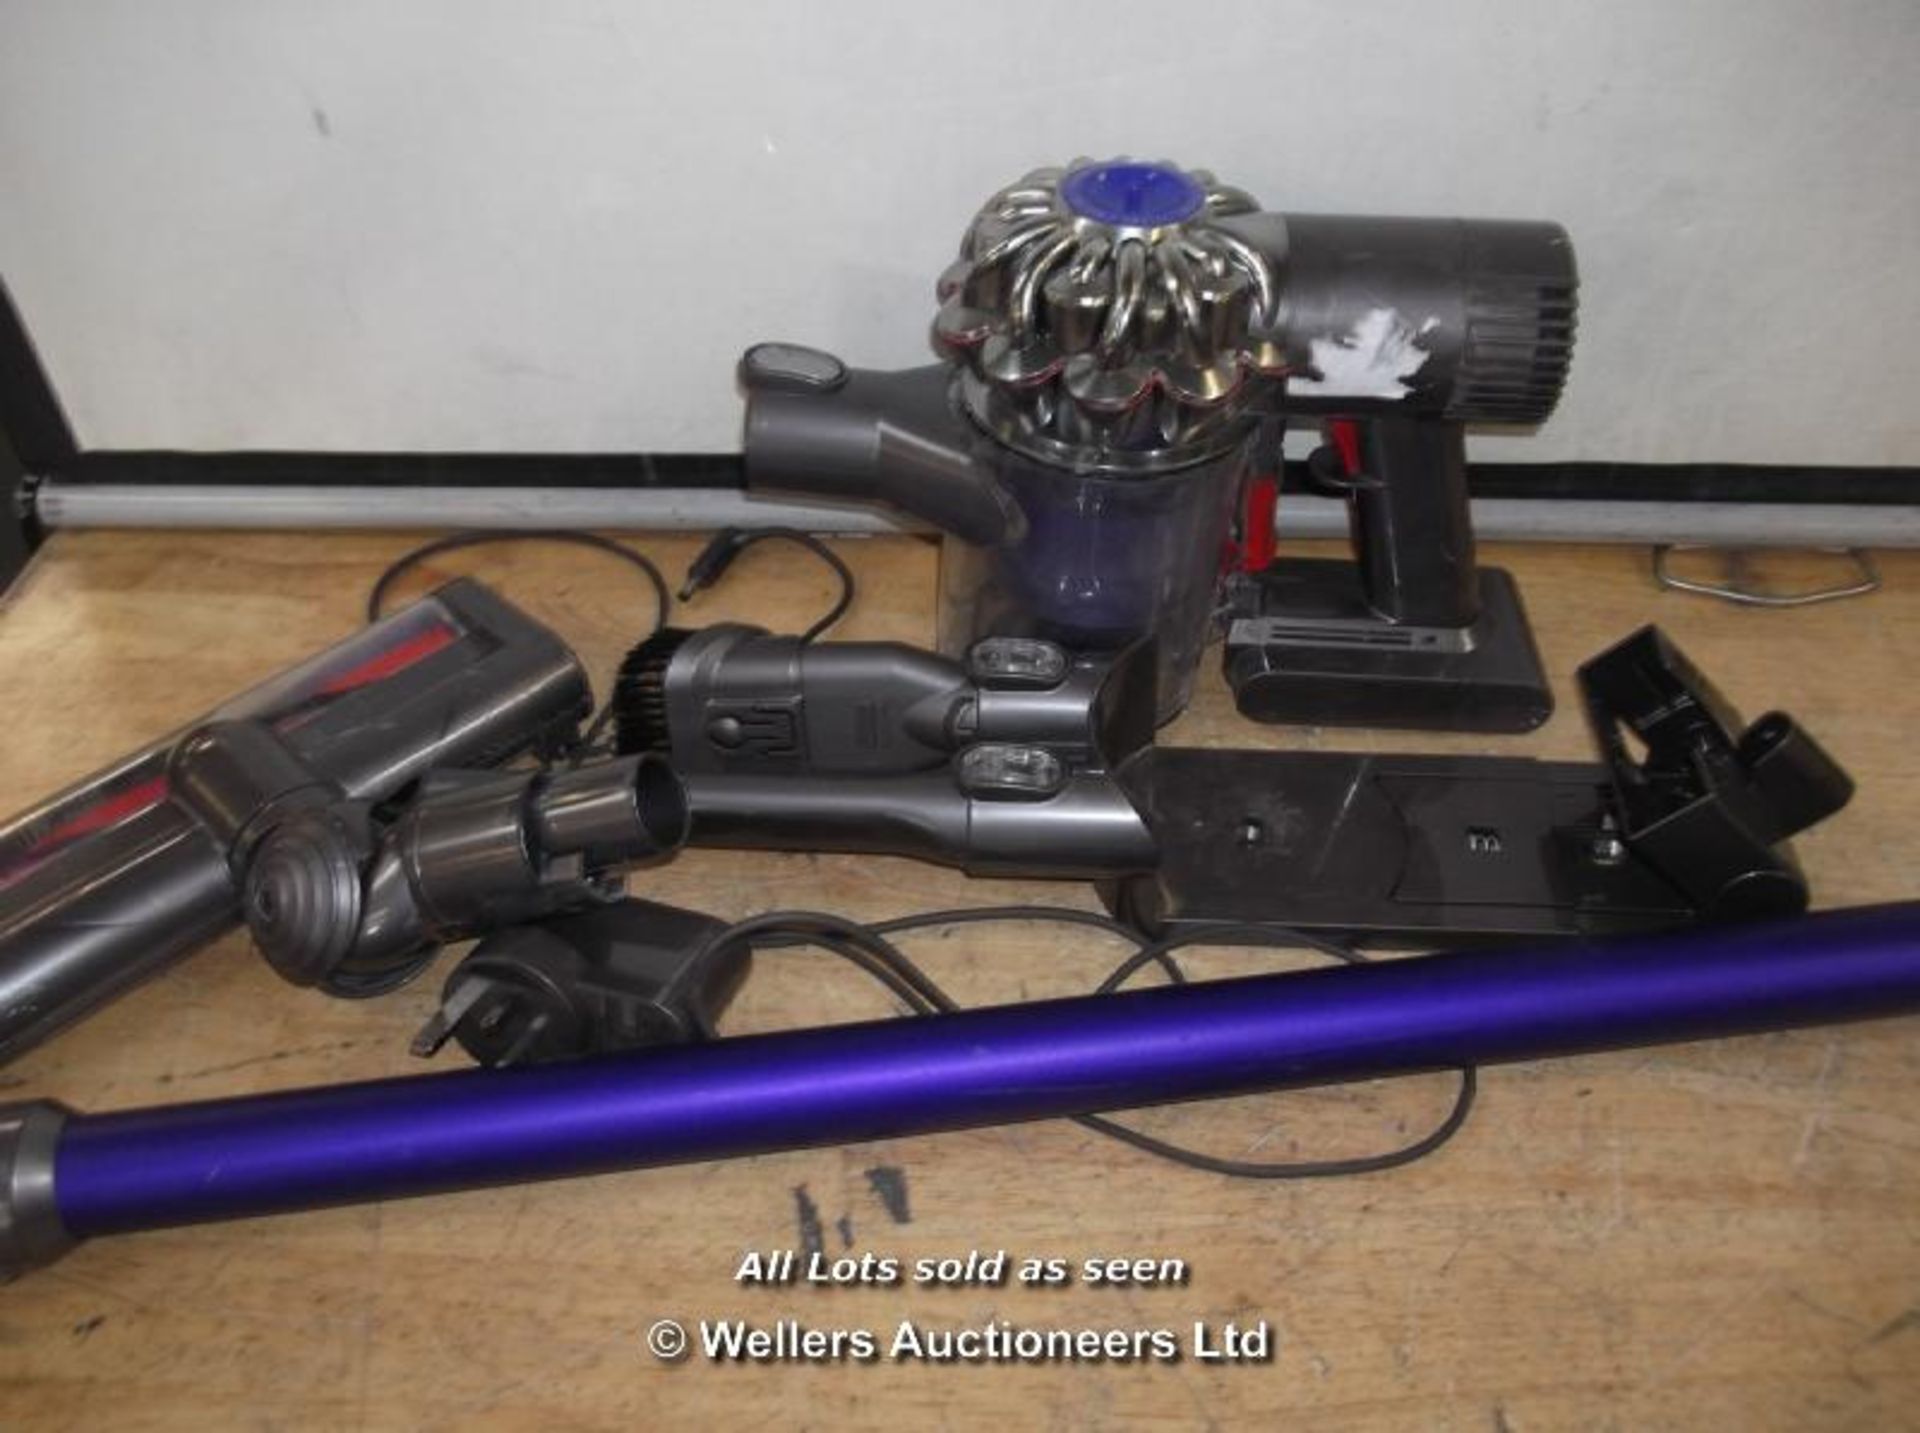 DYSON DC59 ANIMAL VACUUM HAS POWER WITH CHARGING U - Image 2 of 2